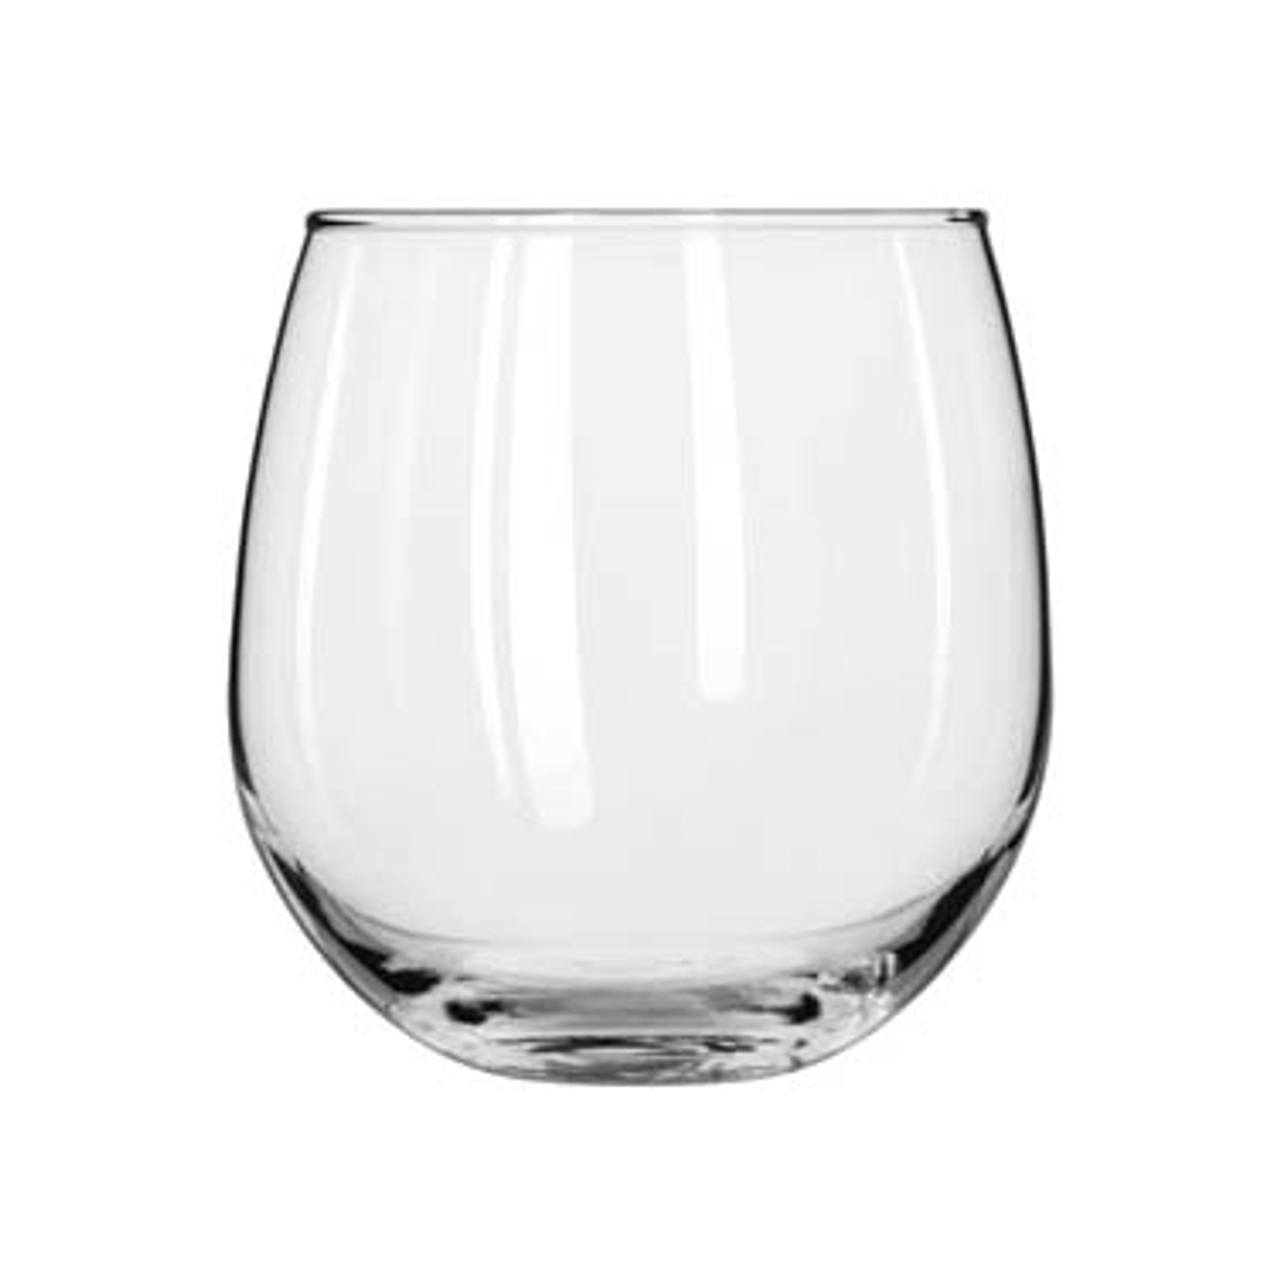 https://cdn11.bigcommerce.com/s-g3i86bef61/images/stencil/1280x1280/products/1506/4222/Libbey-222-Stemless-Red-Wine-Glass__37934.1667492407.png?c=1